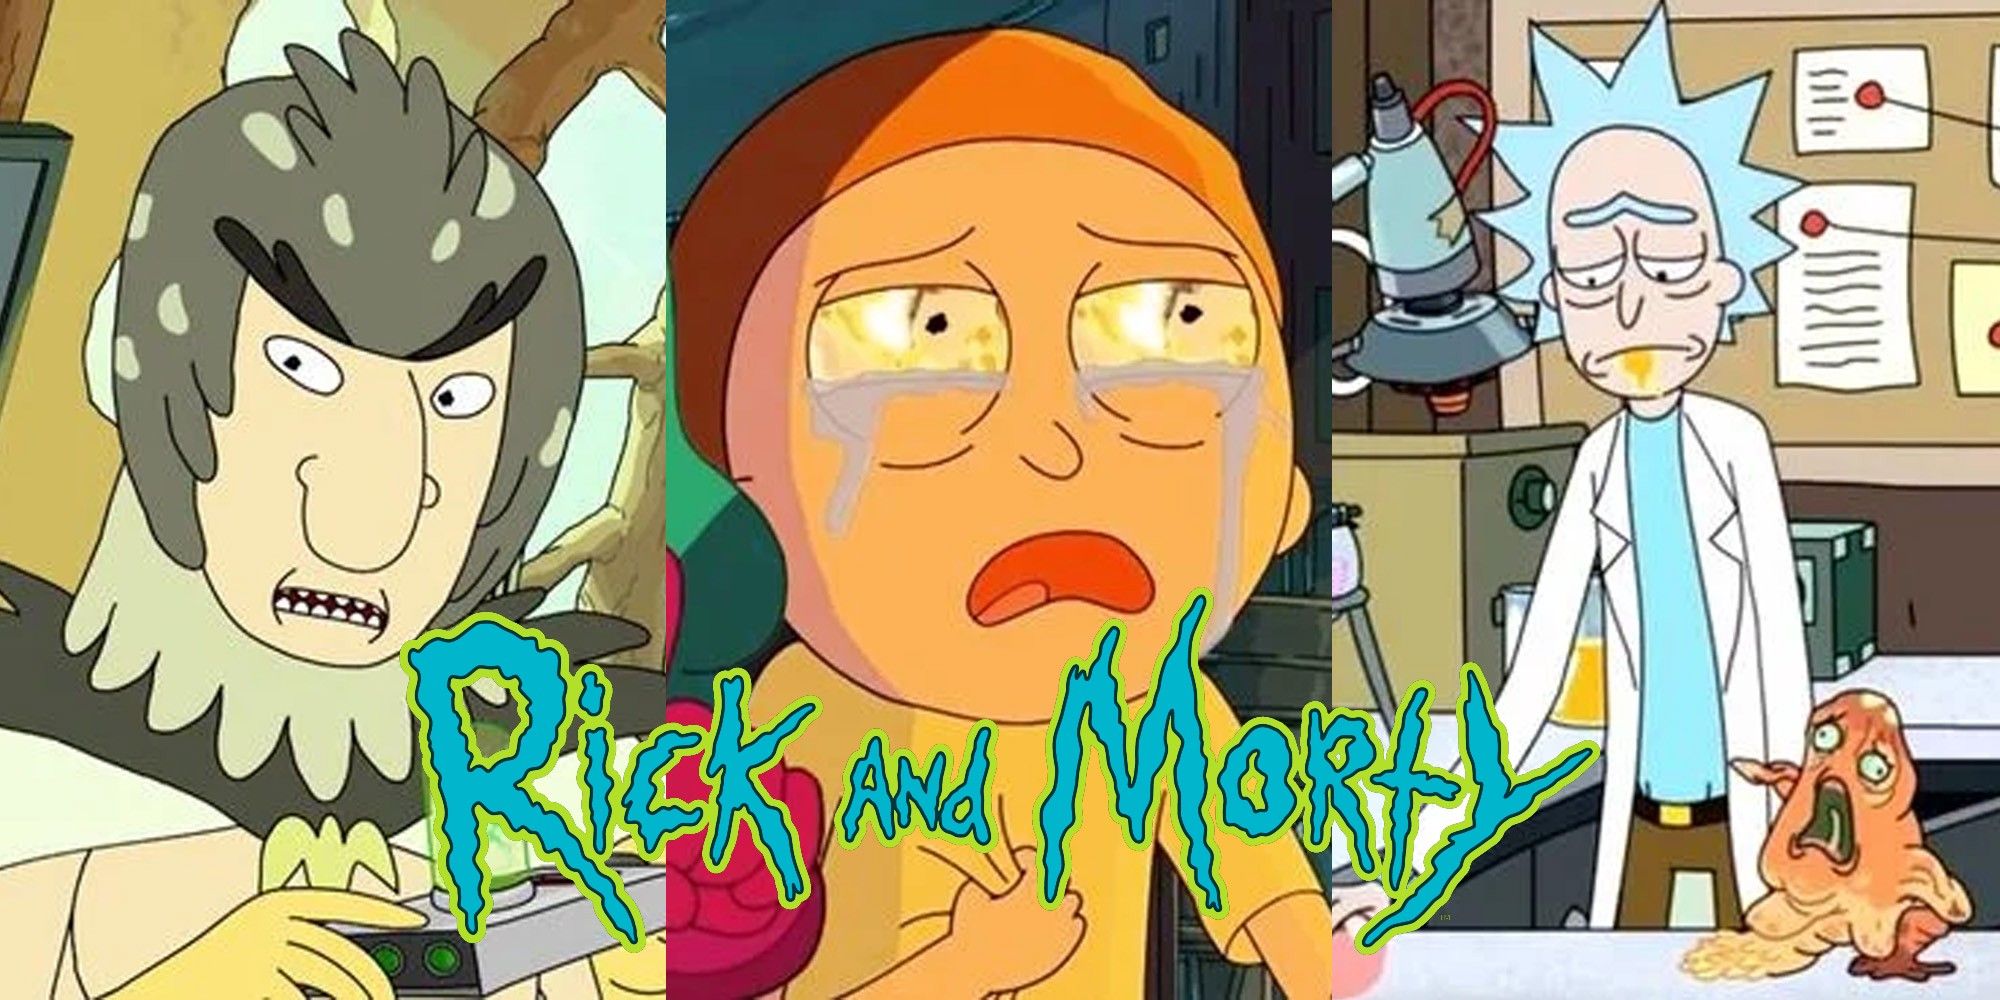 Split image of Bird Person, Morty and Rick from Rick and Morty